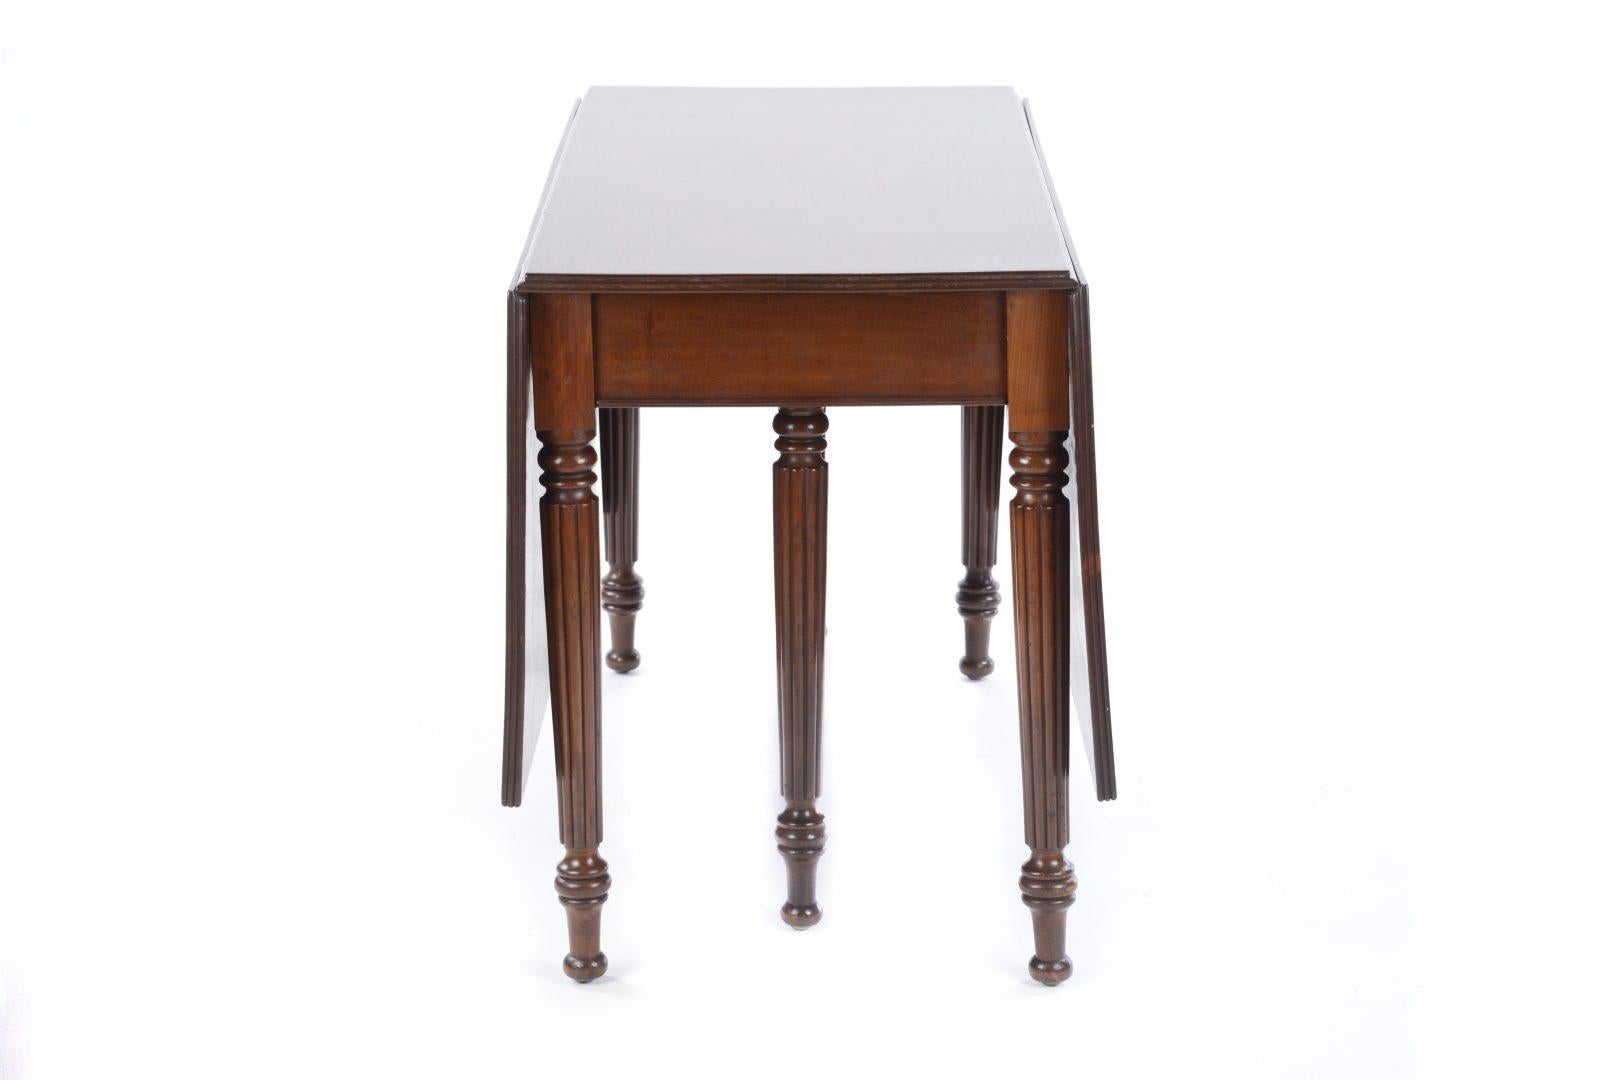 19th Century Regency Mahogany Drop Leaf Dining Table in the Style of Gillows